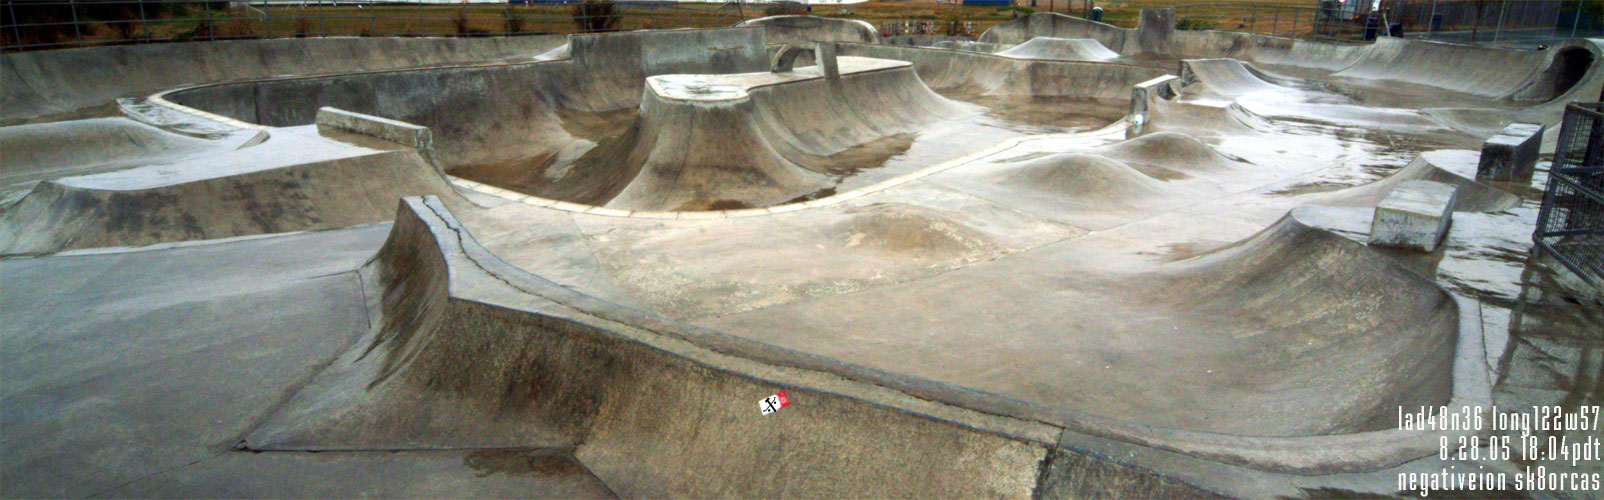 orcas island is the best skatepark on the planet